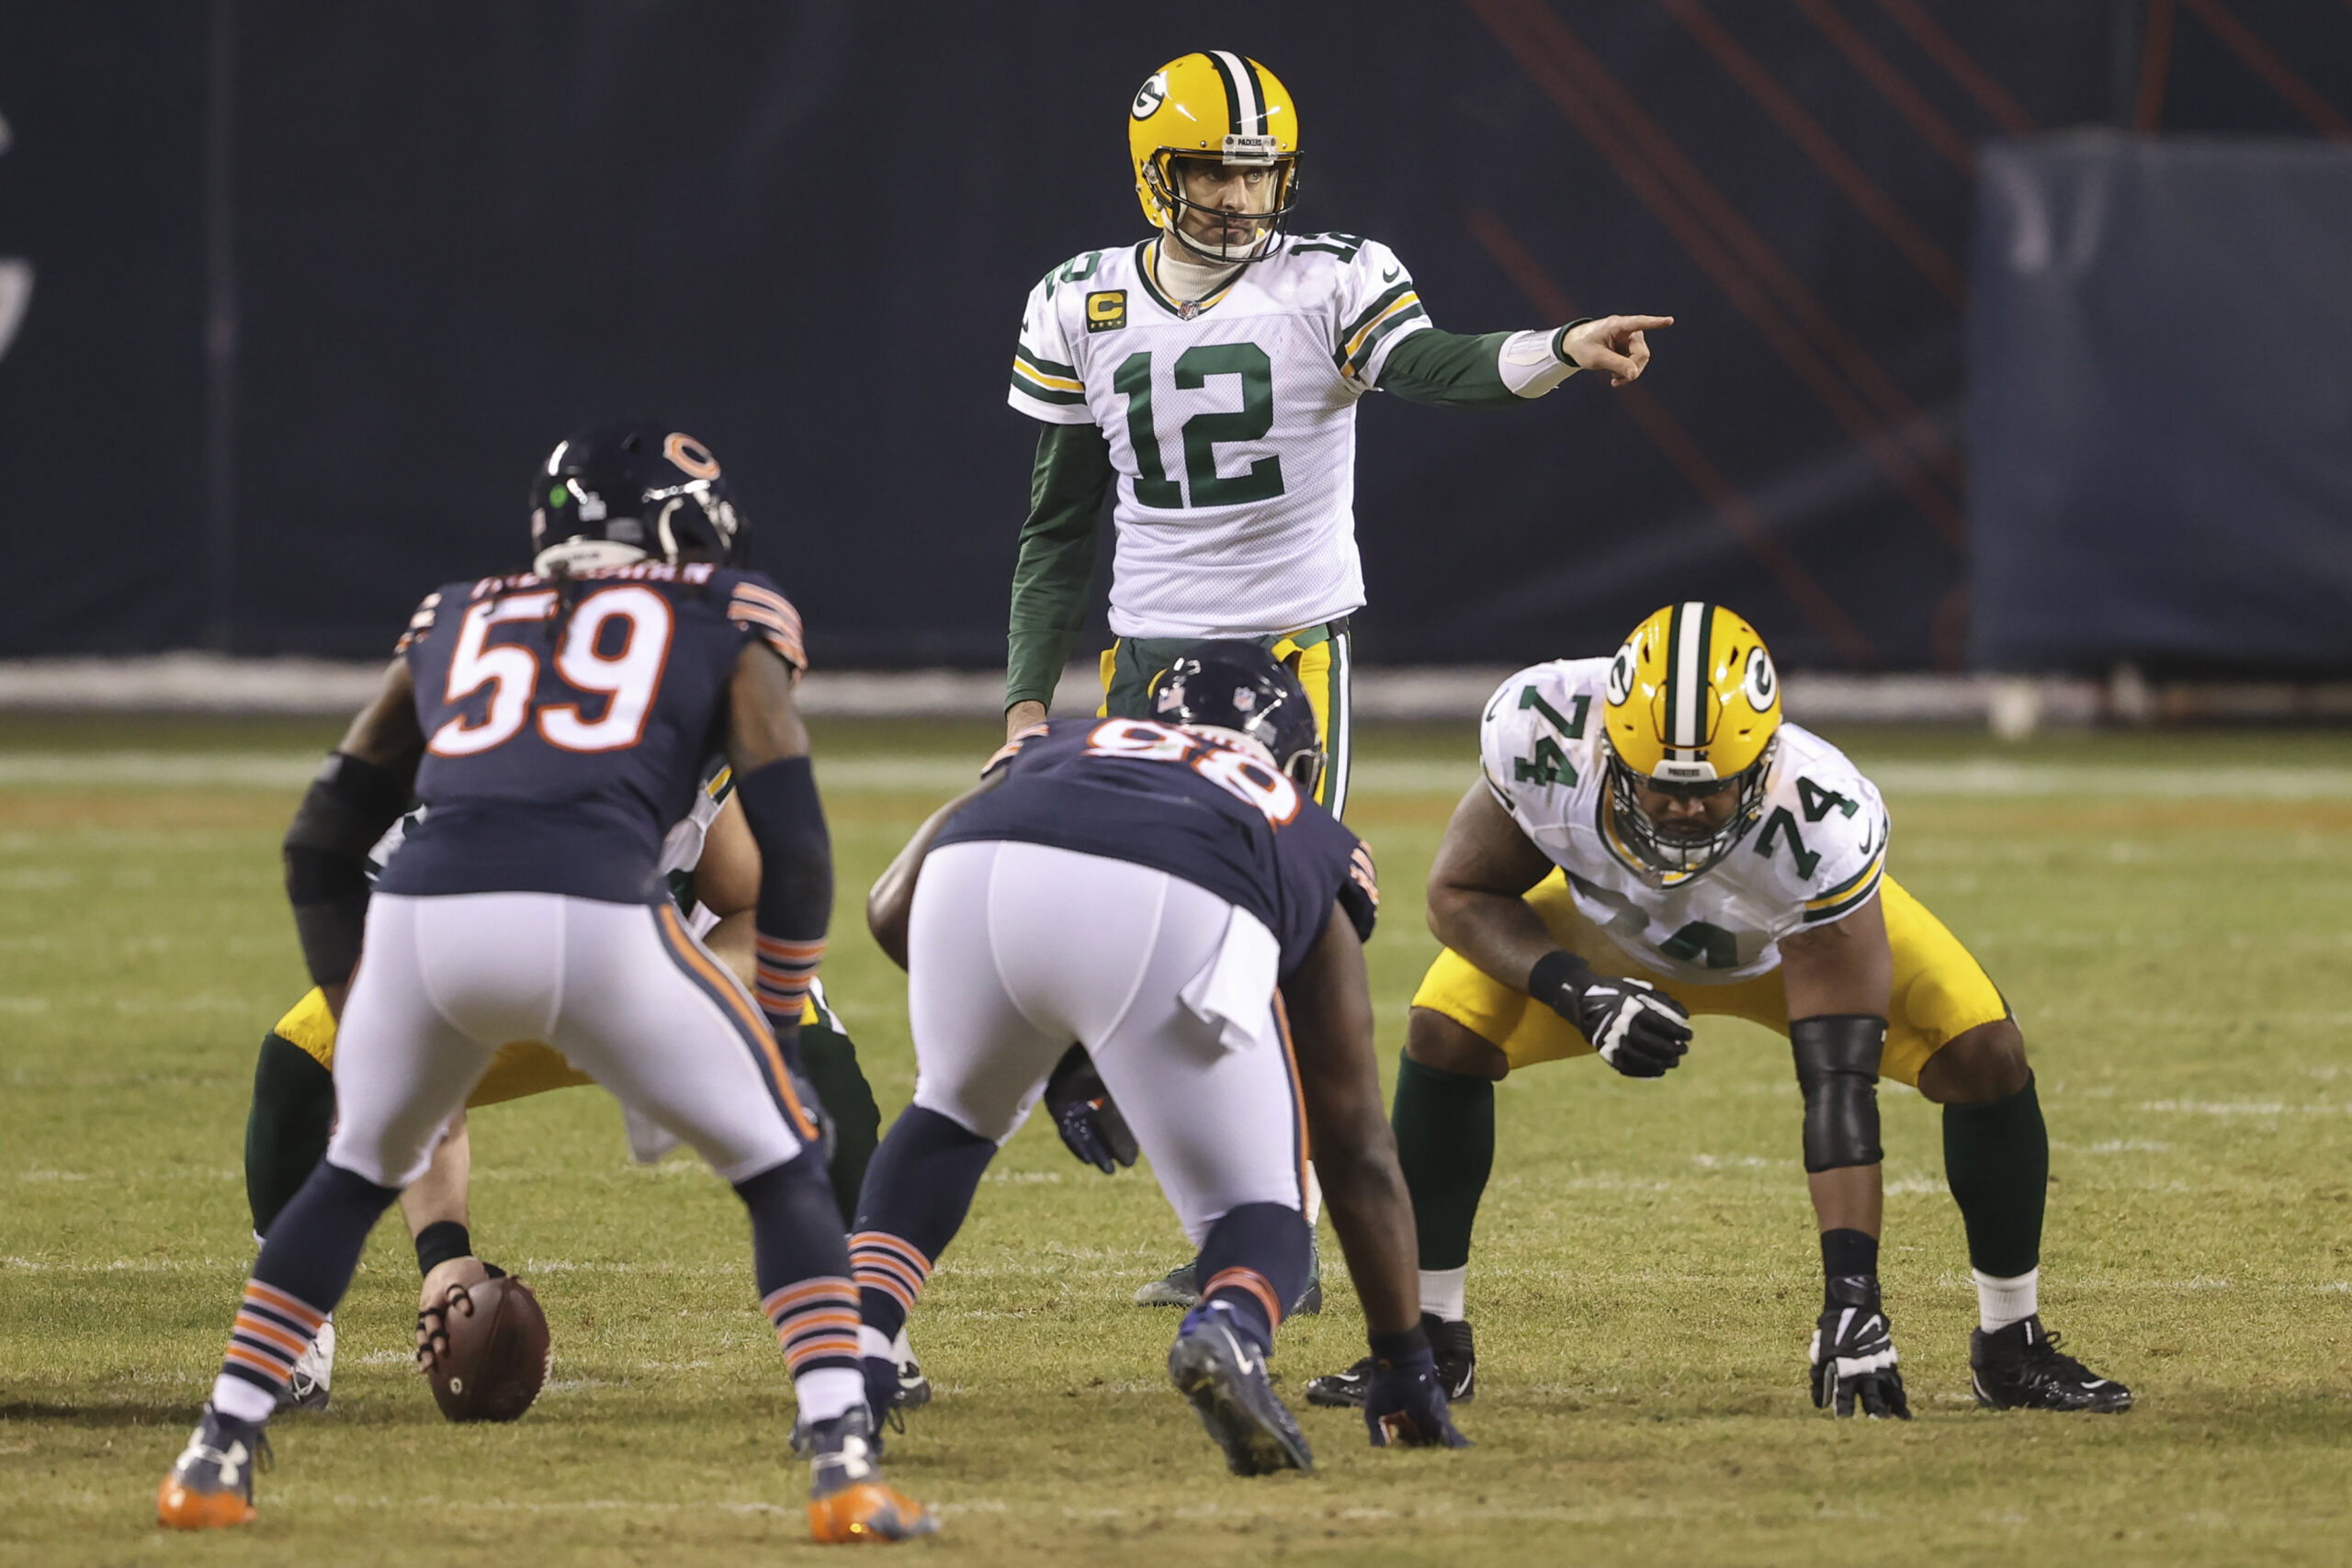 With lead in NFC North, Packers prepare to face division rivals in Chicago